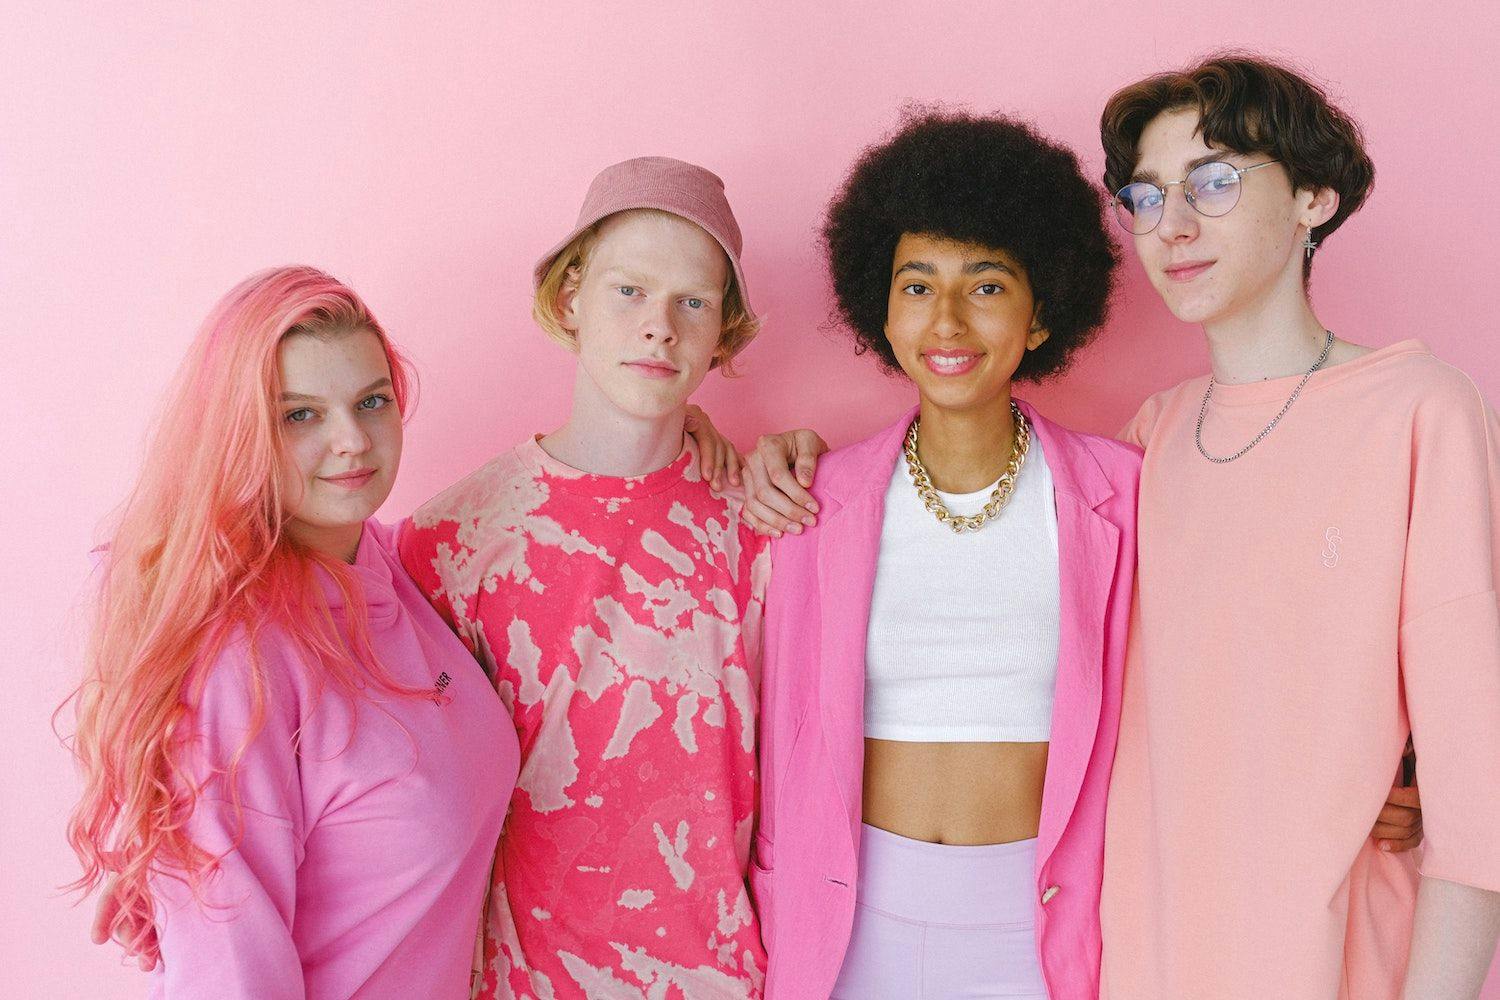 Four teens stand together, all wearing pink